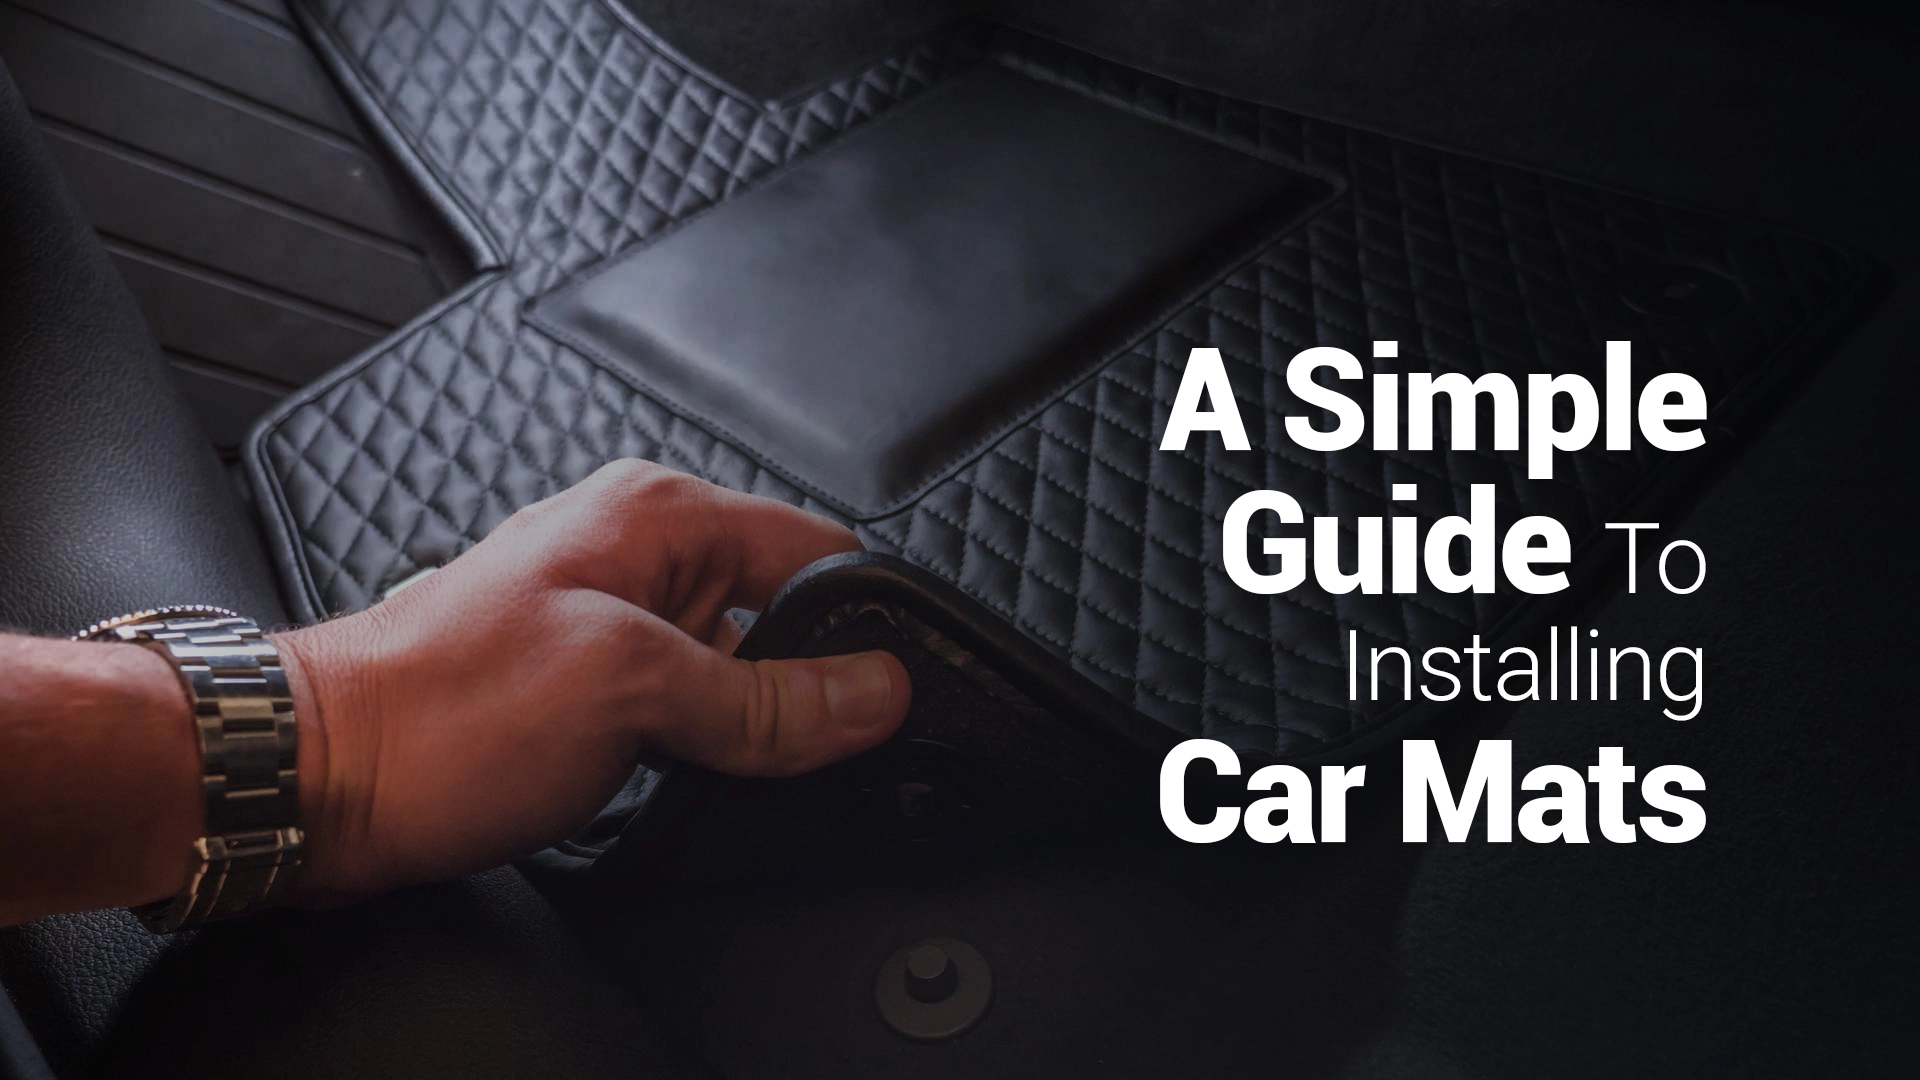 How to Install Car Mats